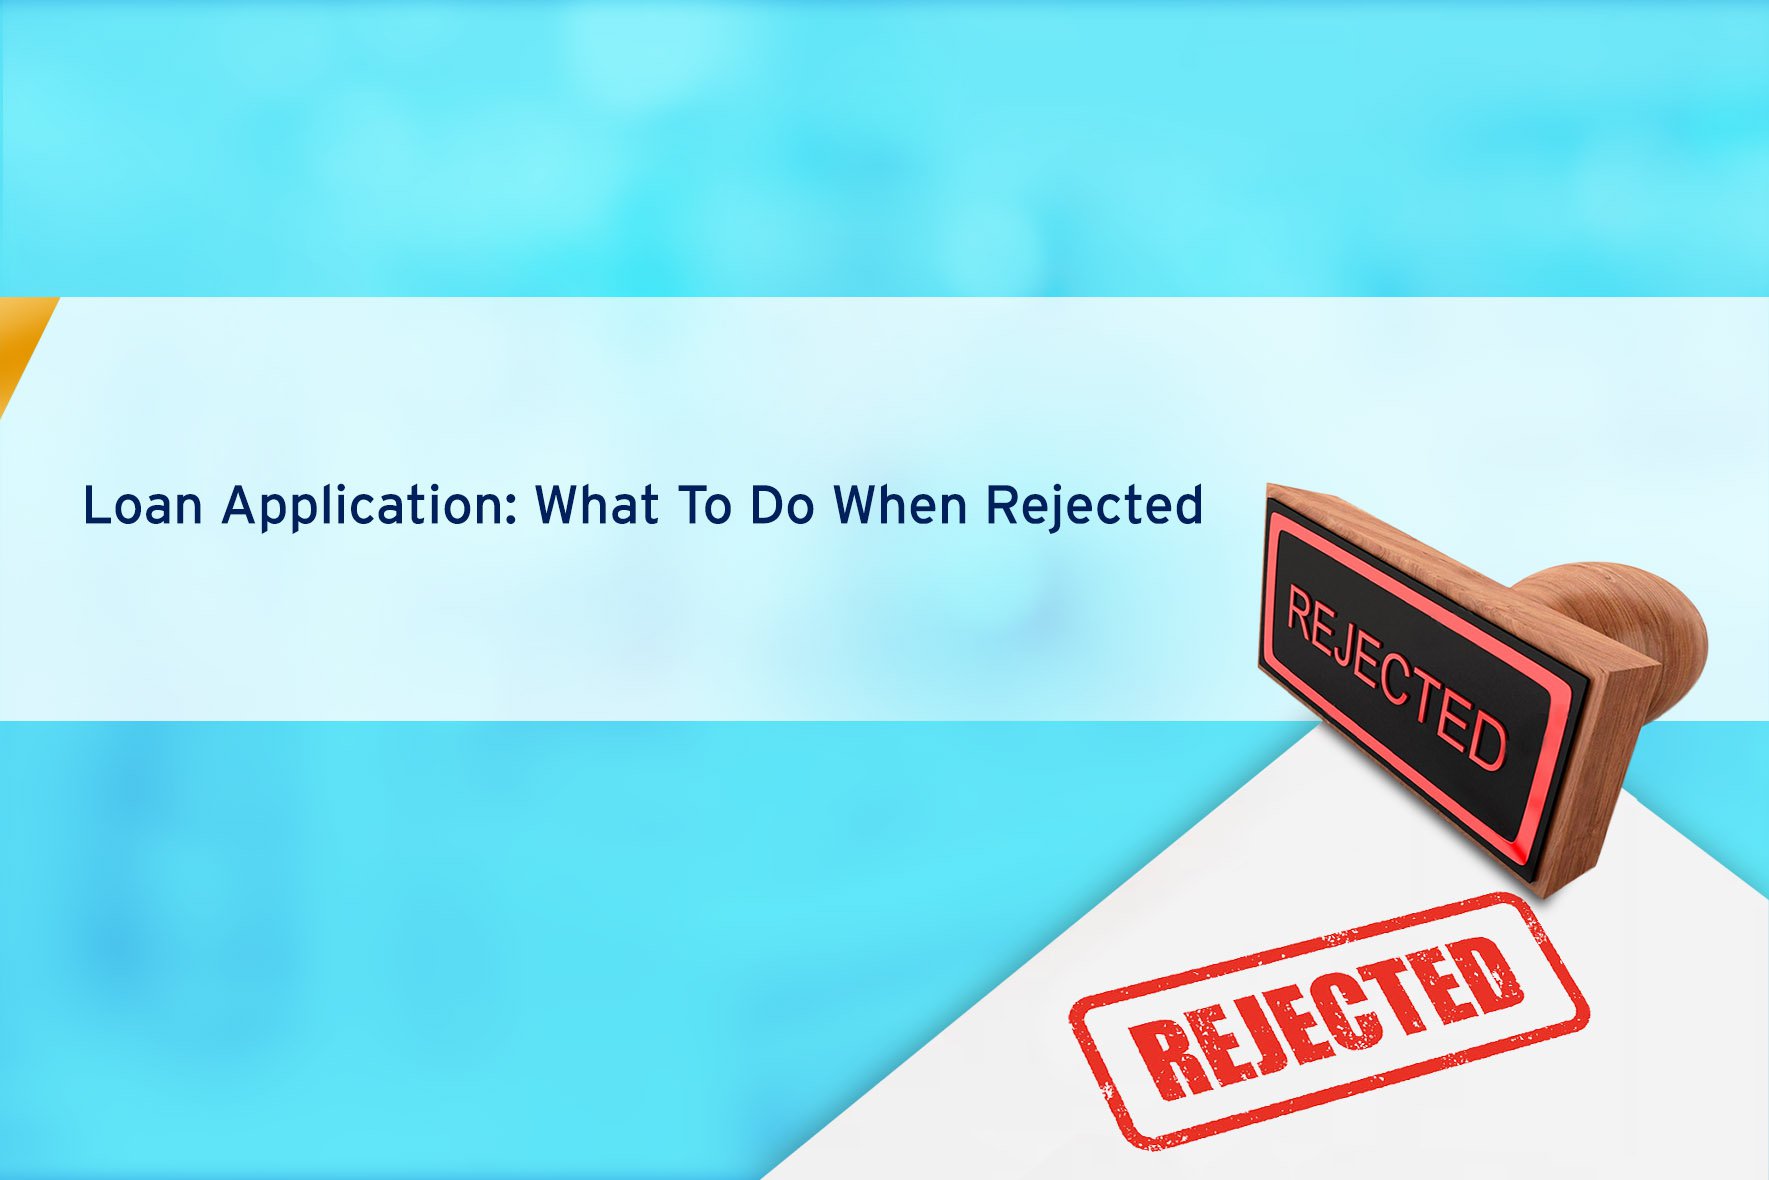 Loan application: What to do when rejected